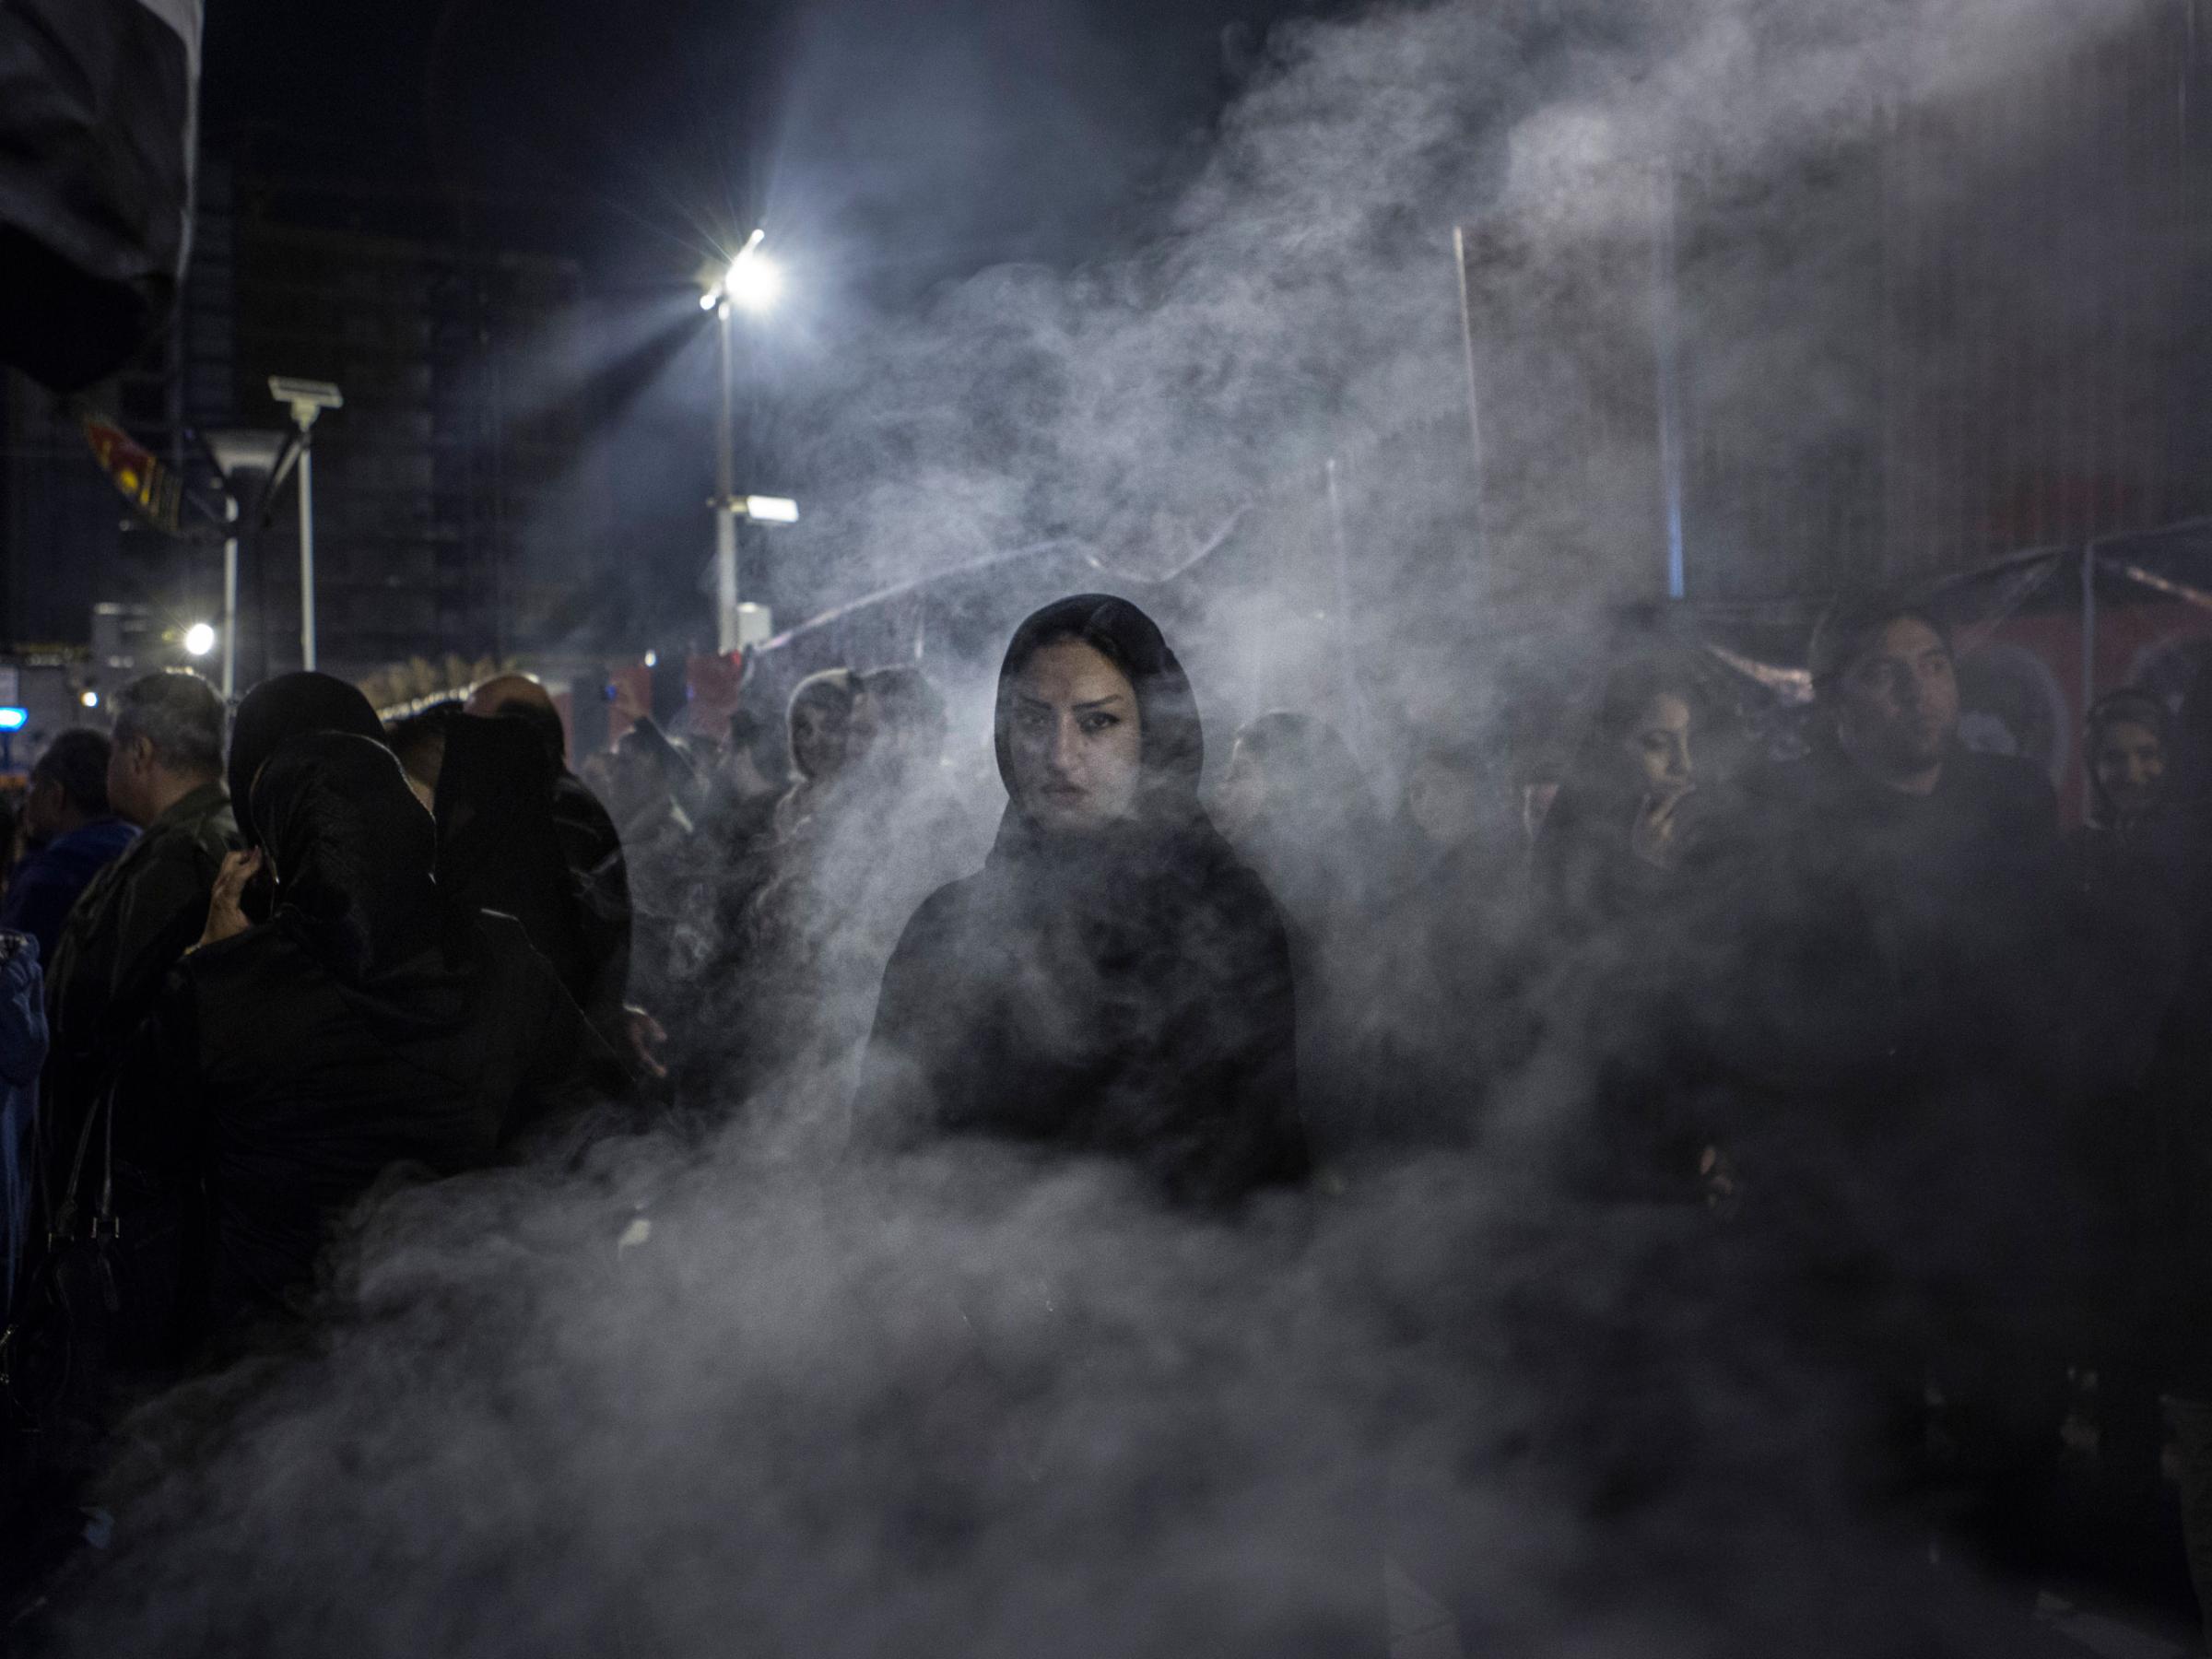 An Iranian women walks through a haze of smoke caused by the burning of 'esfand', a herb. According to popular belief this drives away the evil eye.